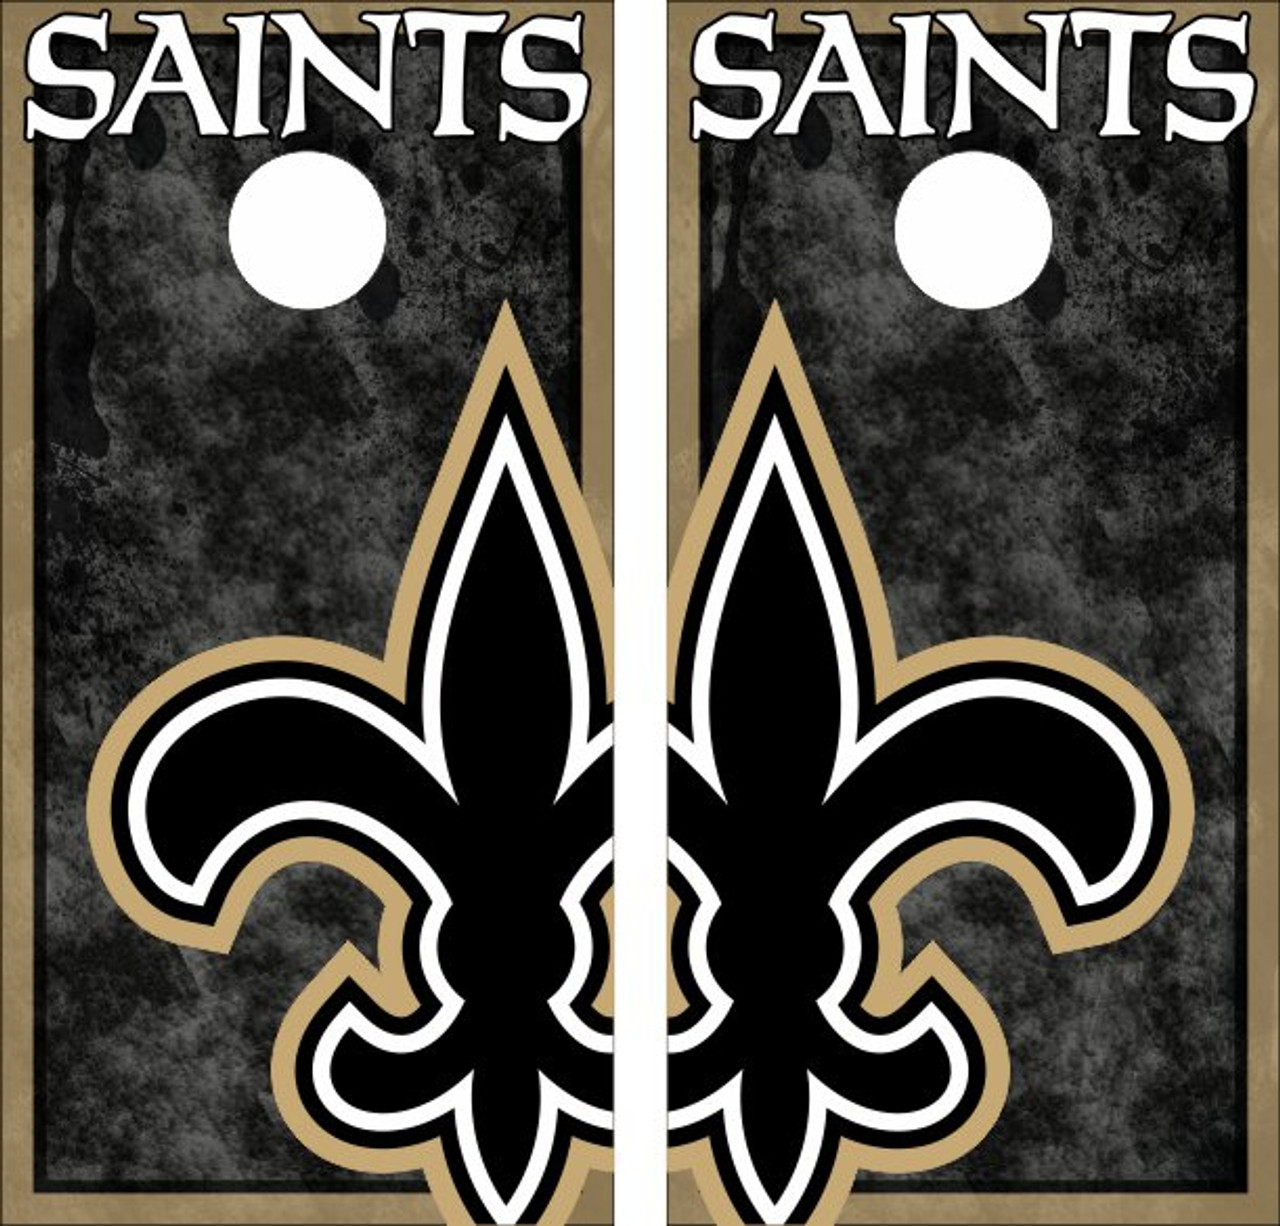 New Orleans Saints cornhole board or vehicle decal s NO2 